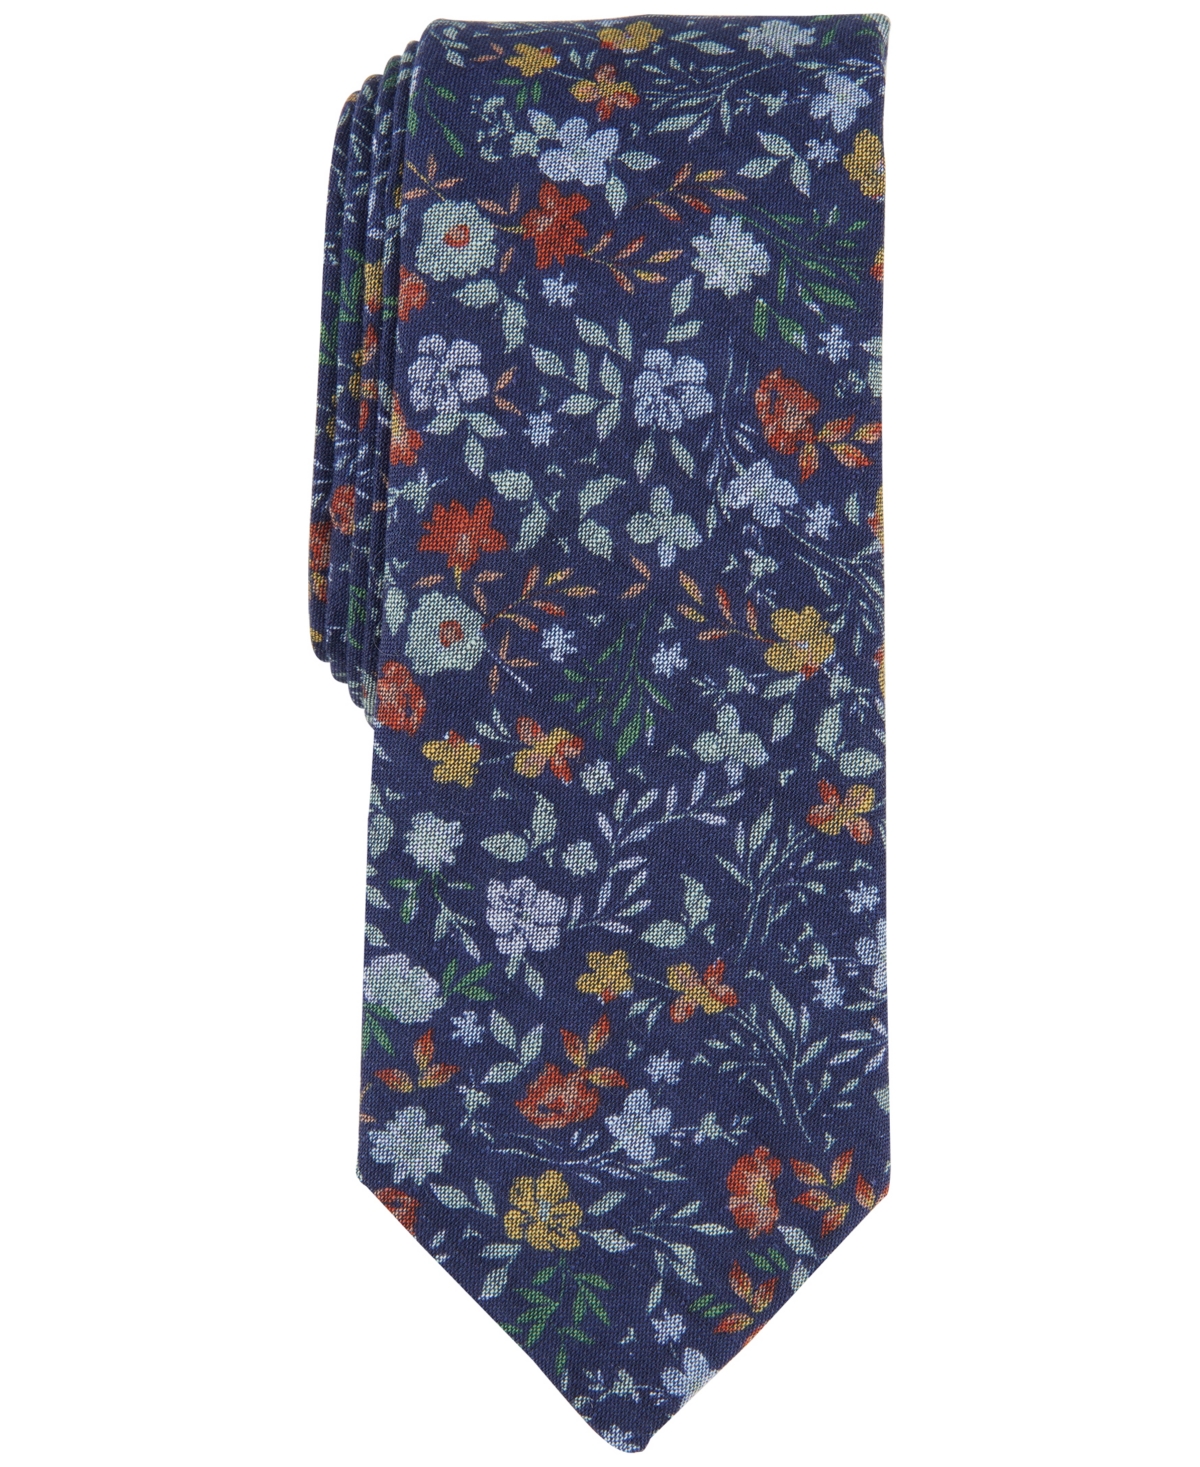 Men's Atkinson Floral Tie, Created for Macy's - Navy